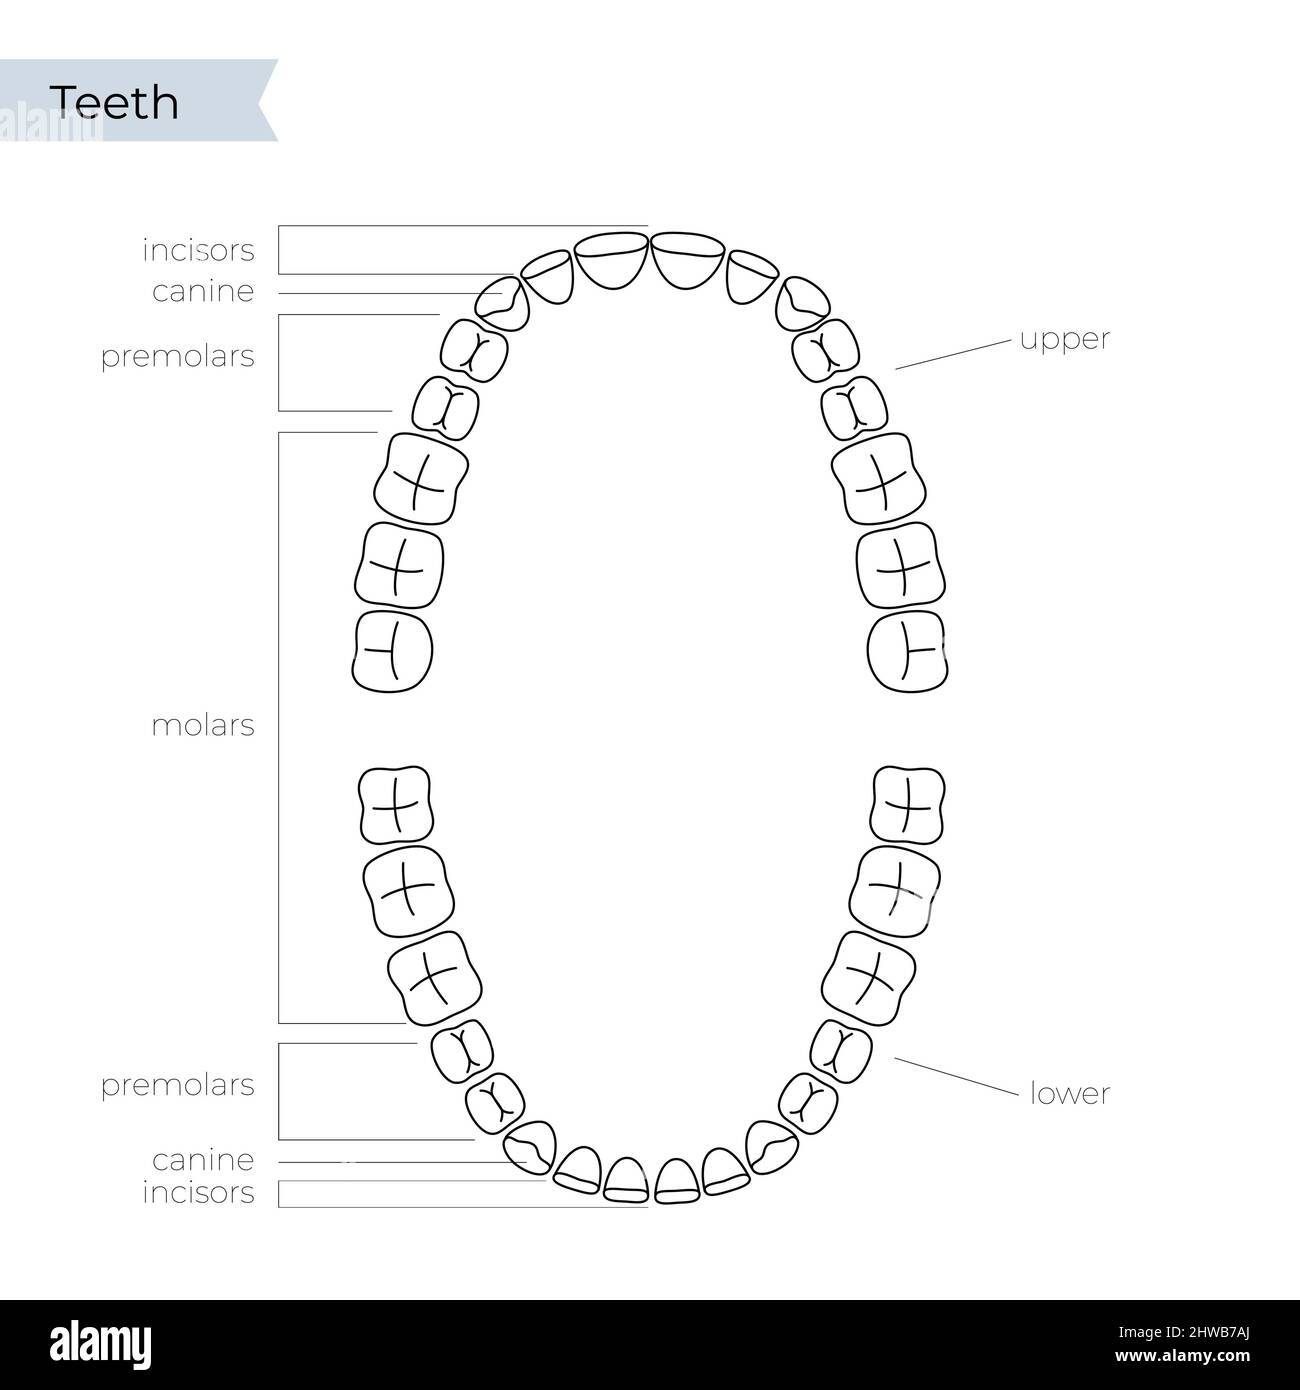 Upper and lower human teeth, illustration Stock Photo